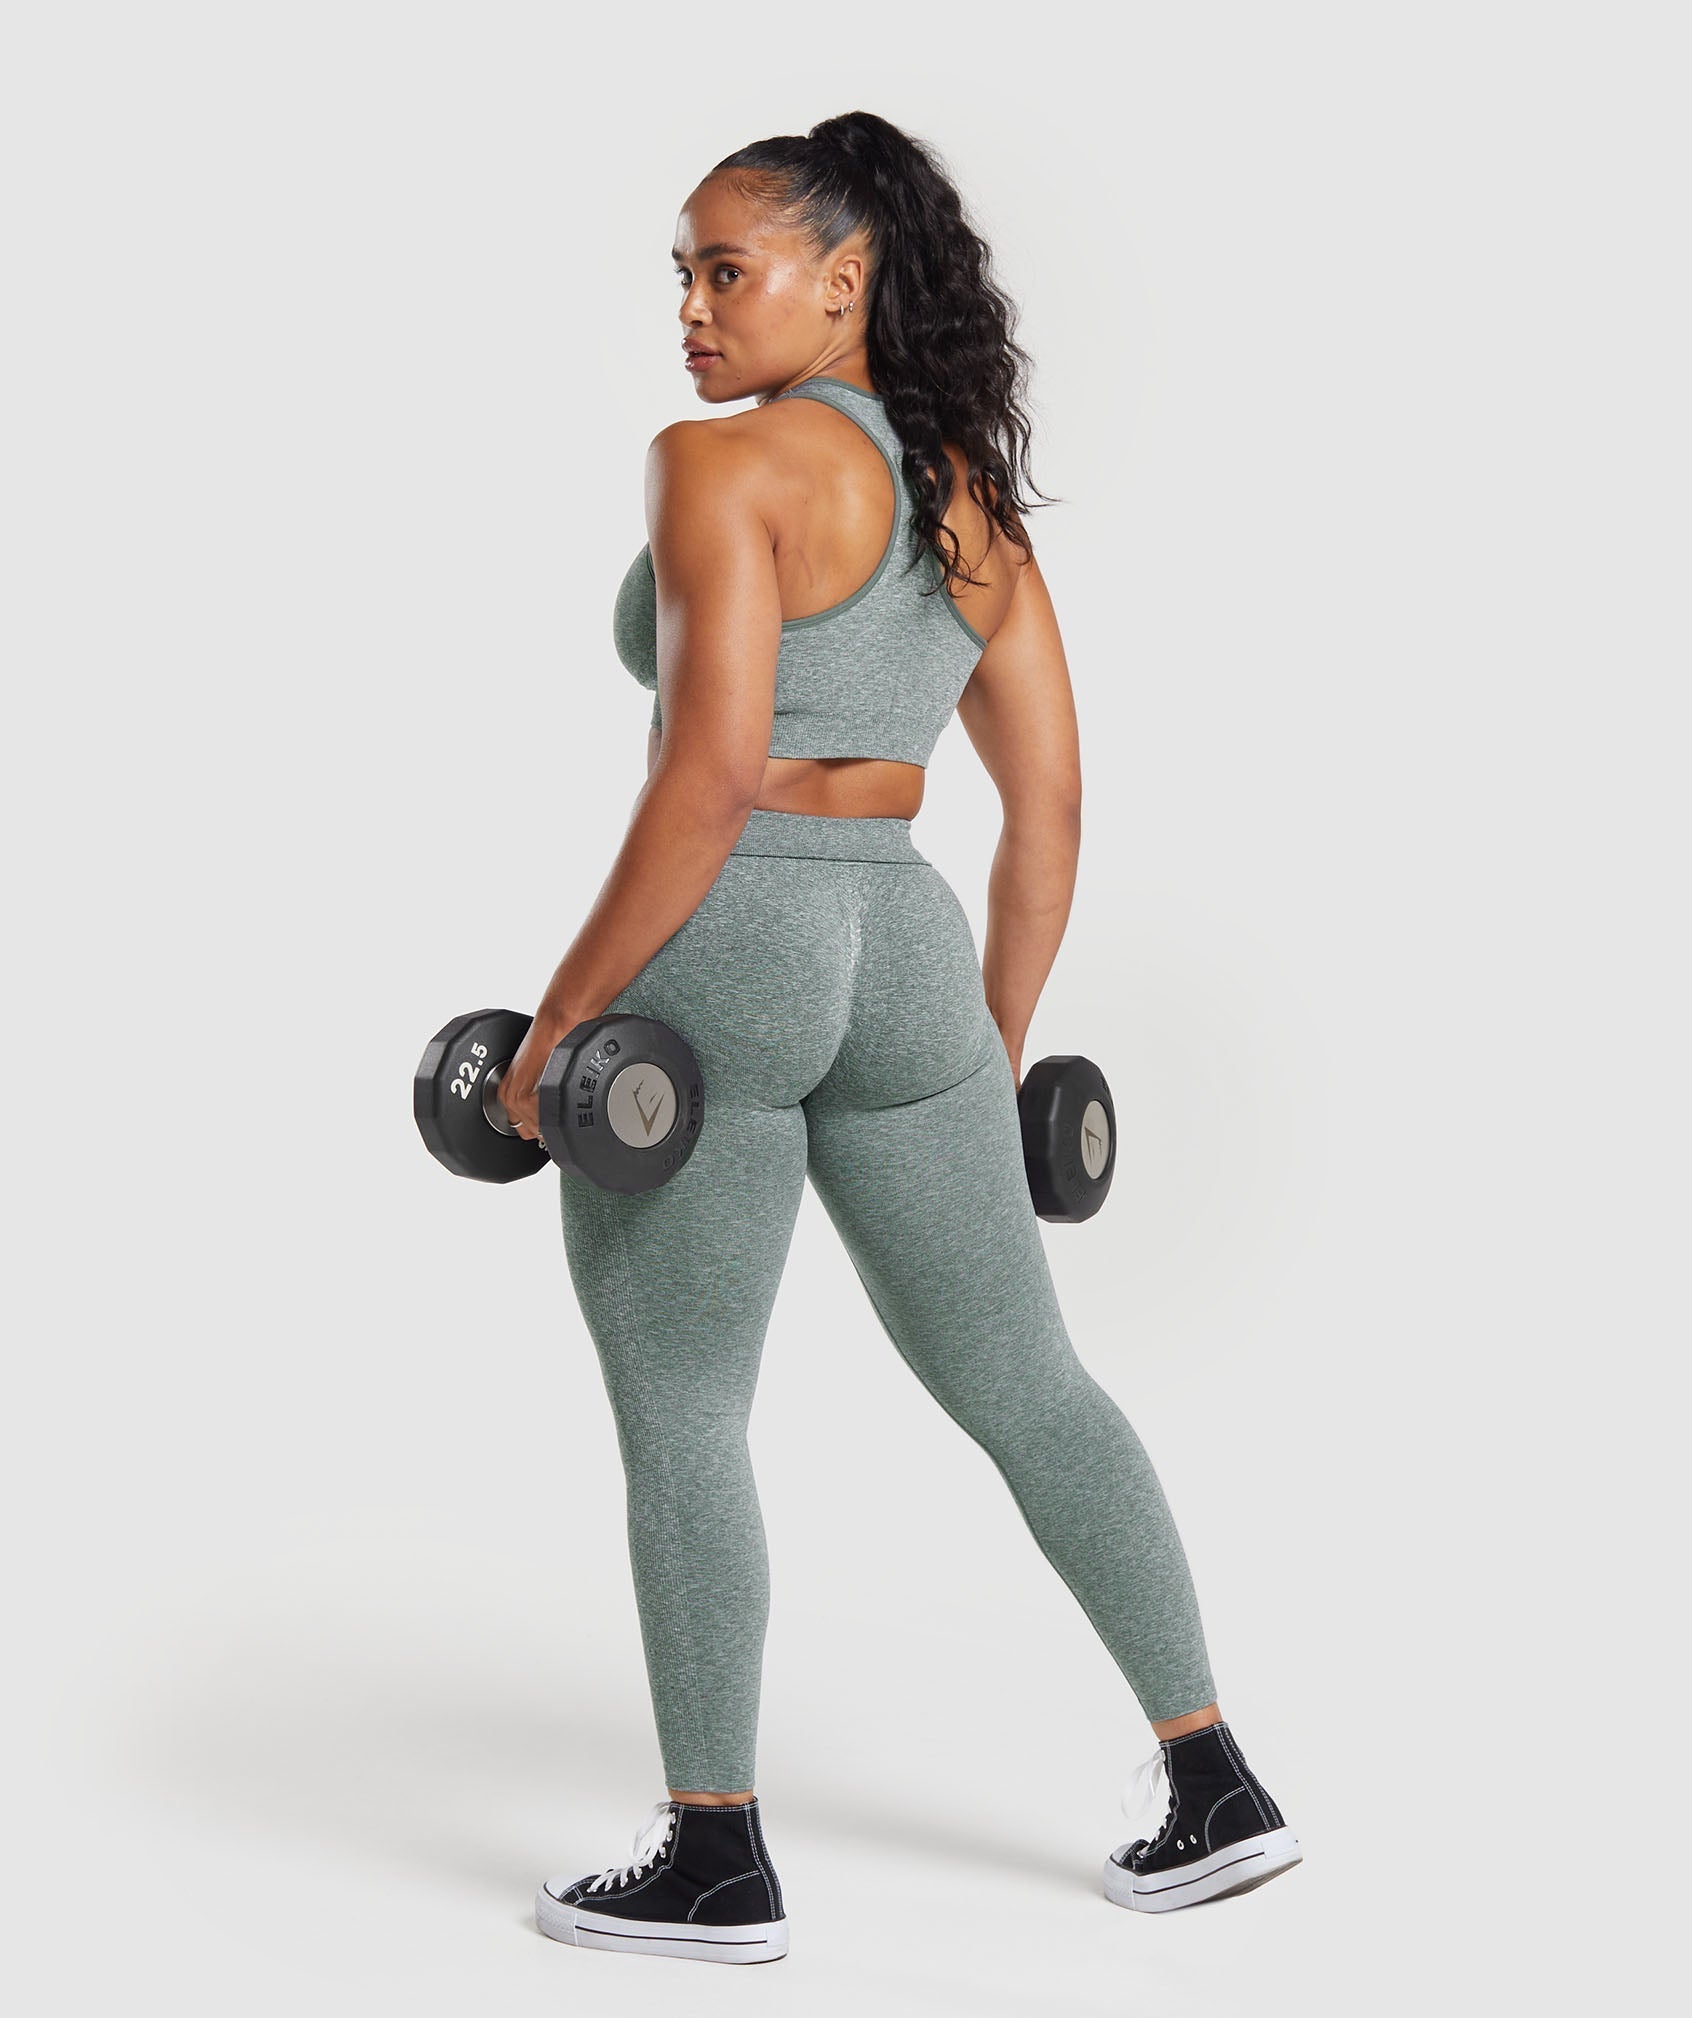 Lift Contour Seamless Leggings in Slate Teal/White Marl - view 5